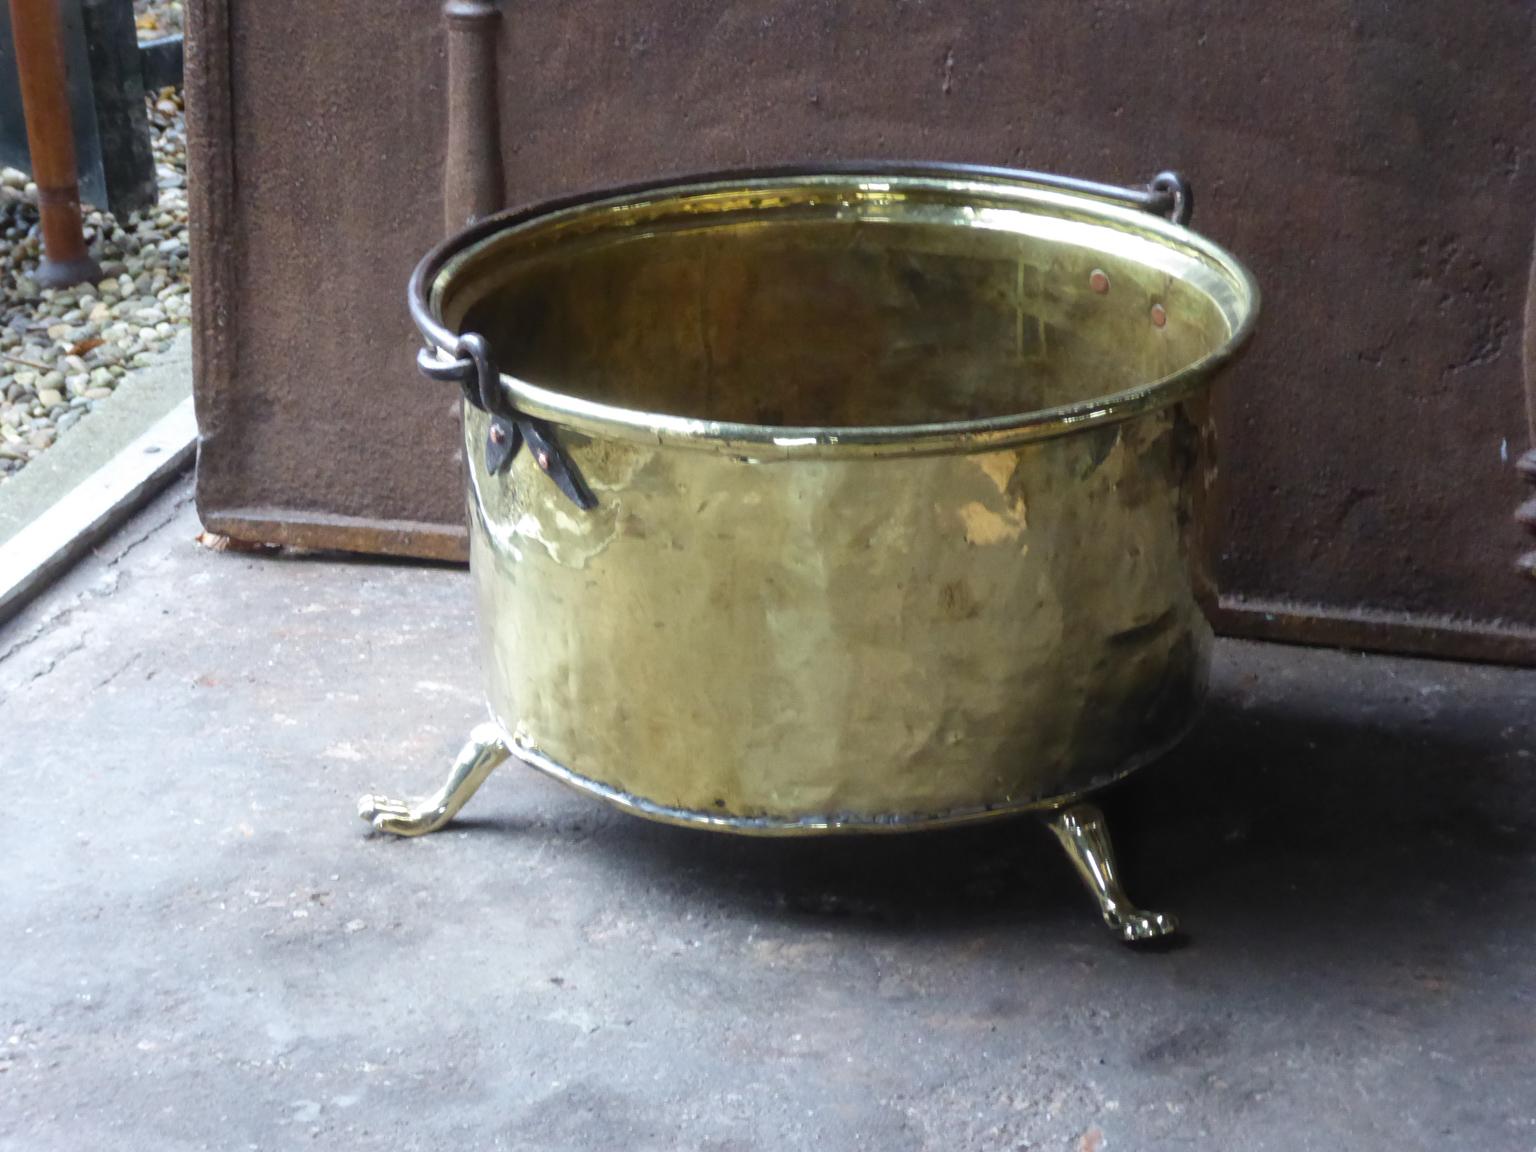 Neoclassical Antique Polished Brass French Log Holder or Log Basket, 18th-19th Century